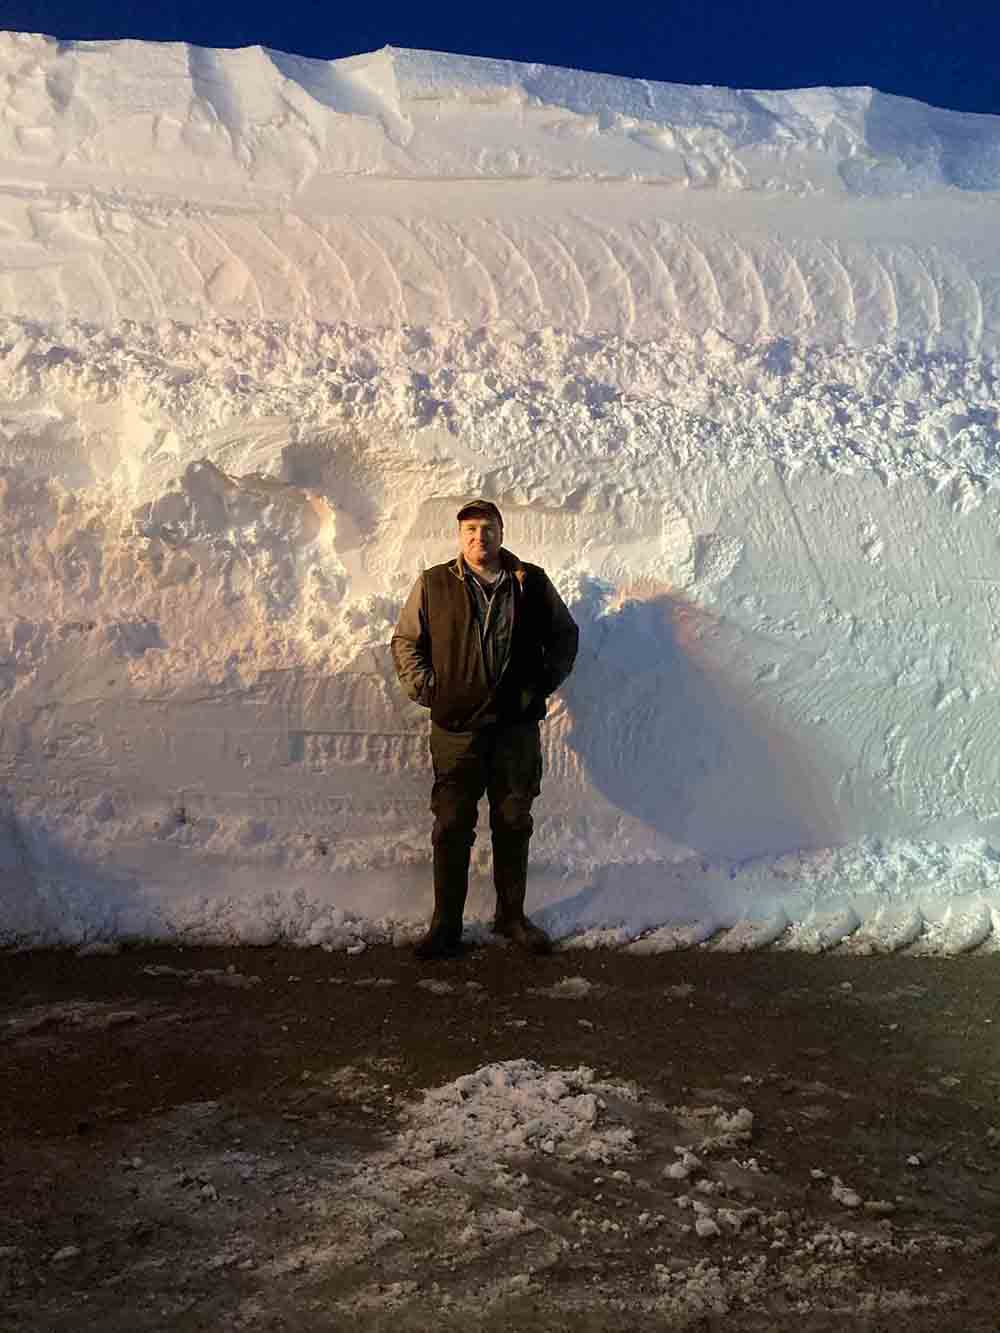 Scots farmer shares amazing images of huge walls of snow - Scottish News